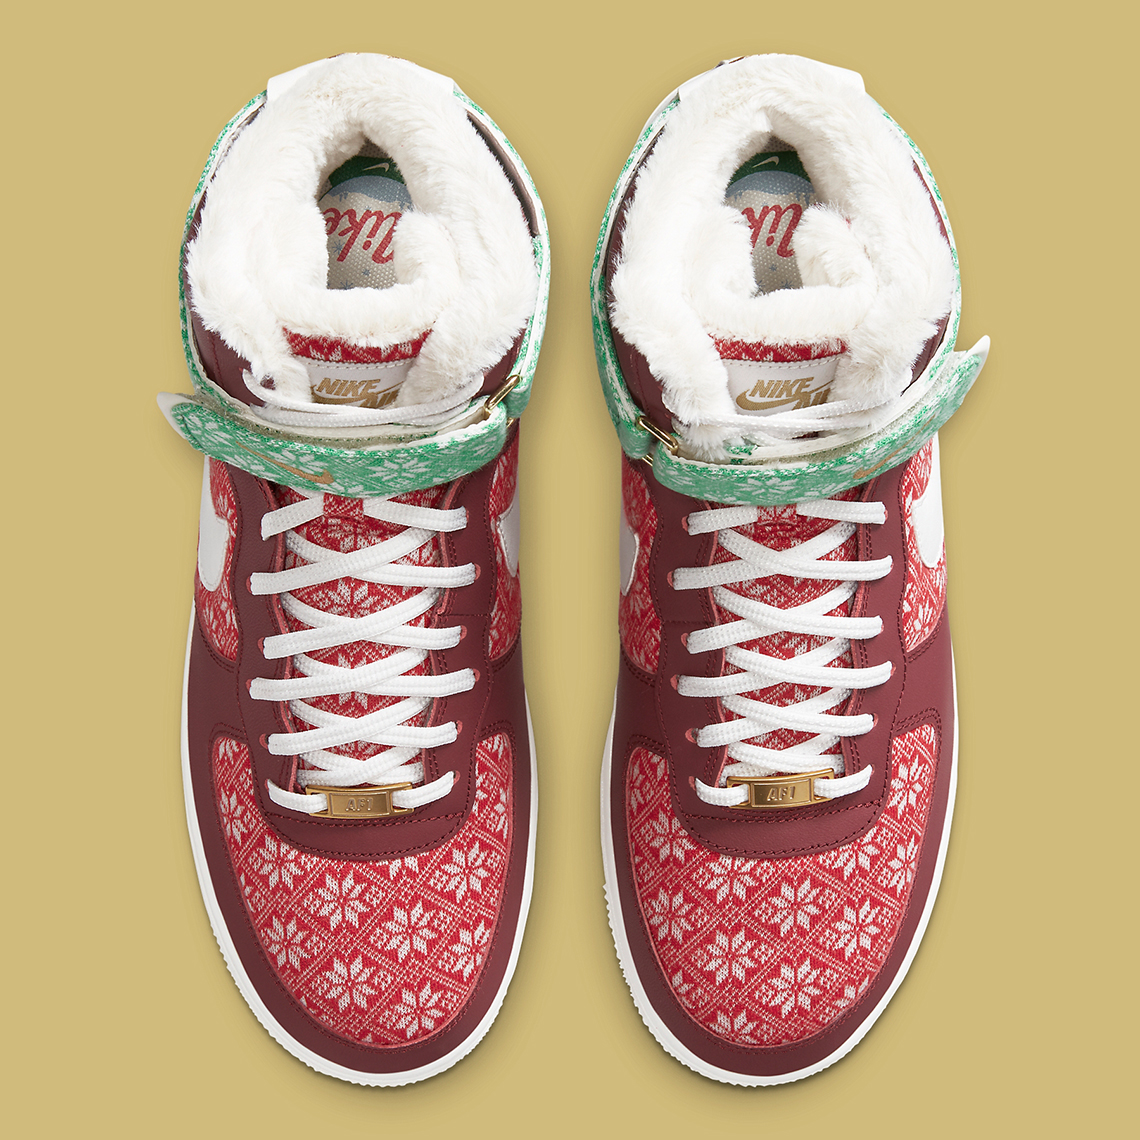 Nike's Feeling Festive With The Air Force 1 High Utility 2.0 Christmas